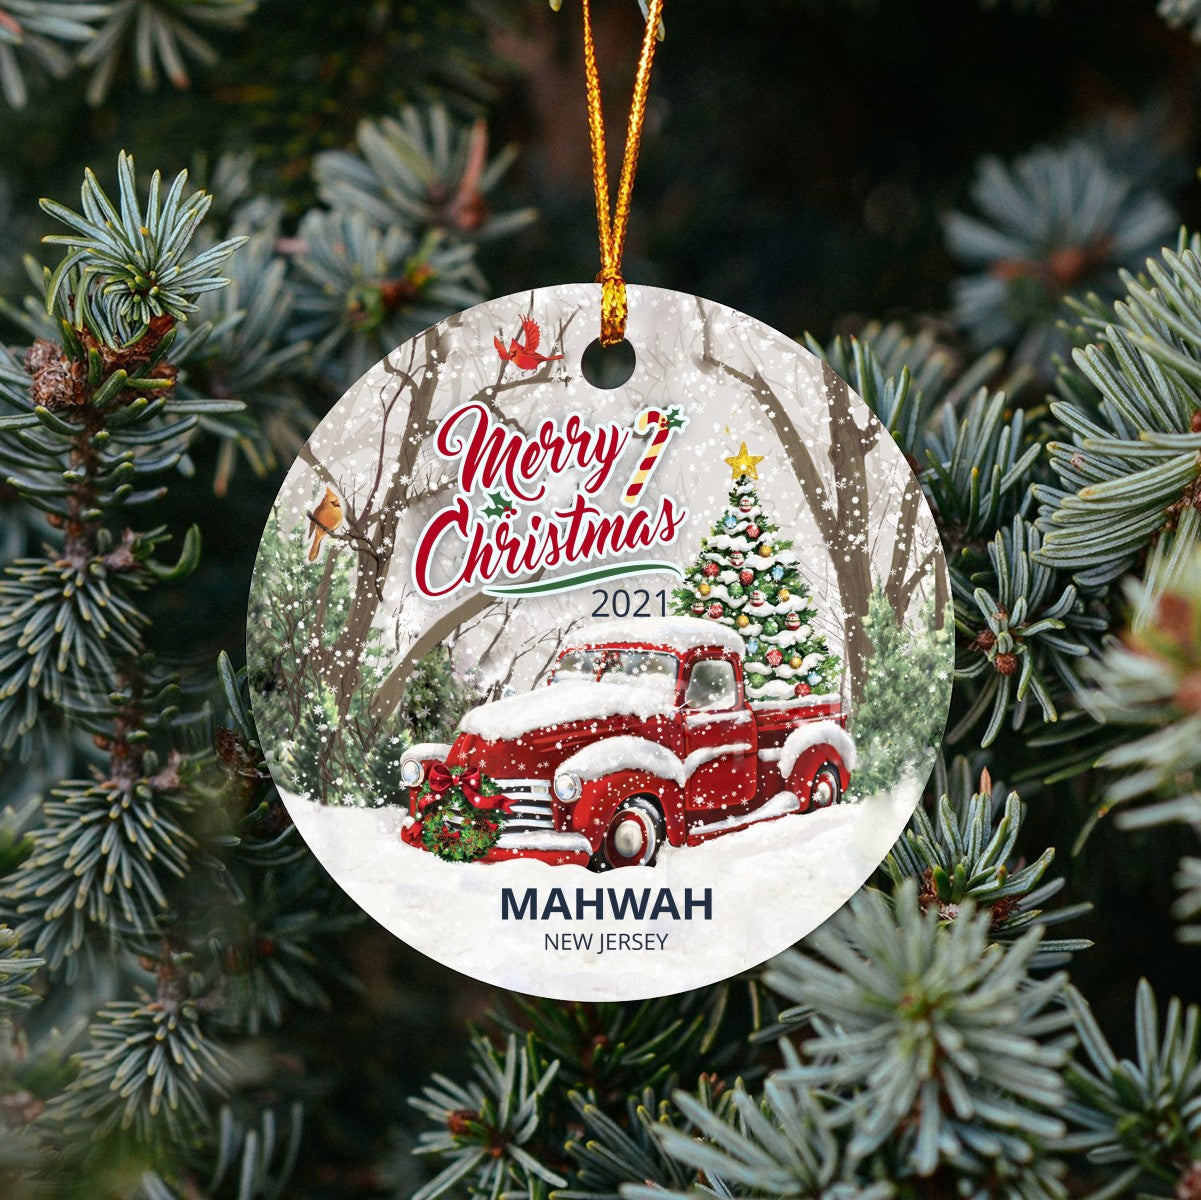 Christmas Tree Ornaments Mahwah - Ornament With Name City, State Mahwah New Jersey NJ Ornament - Red Truck Xmas Ornaments 3'' Plastic Gift For Family, Friend And Housewarming